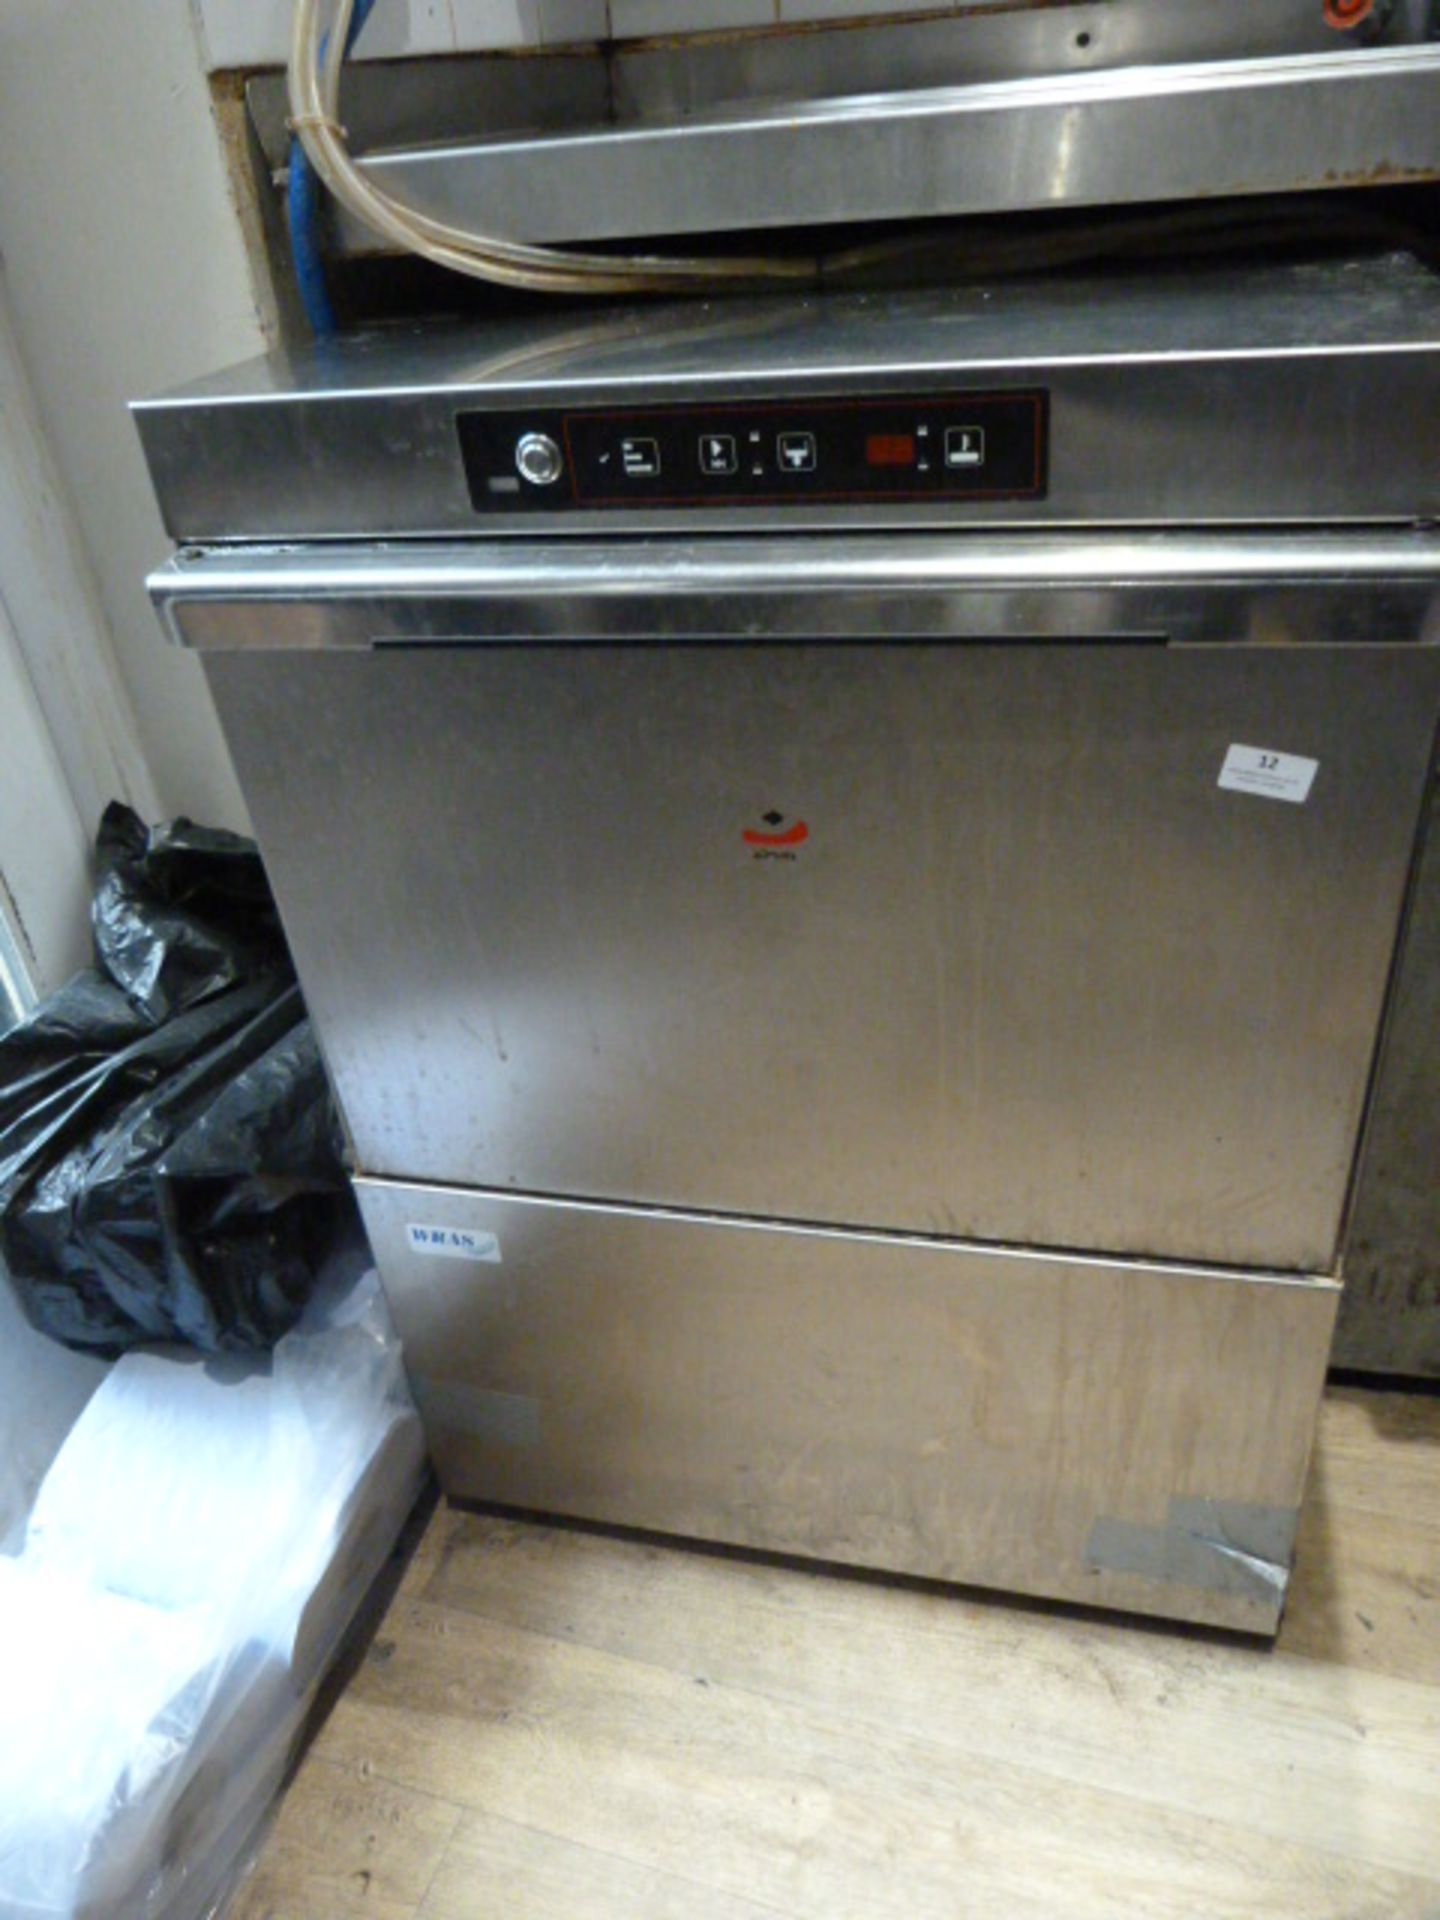 *WRAS Stainless Steel Dishwasher